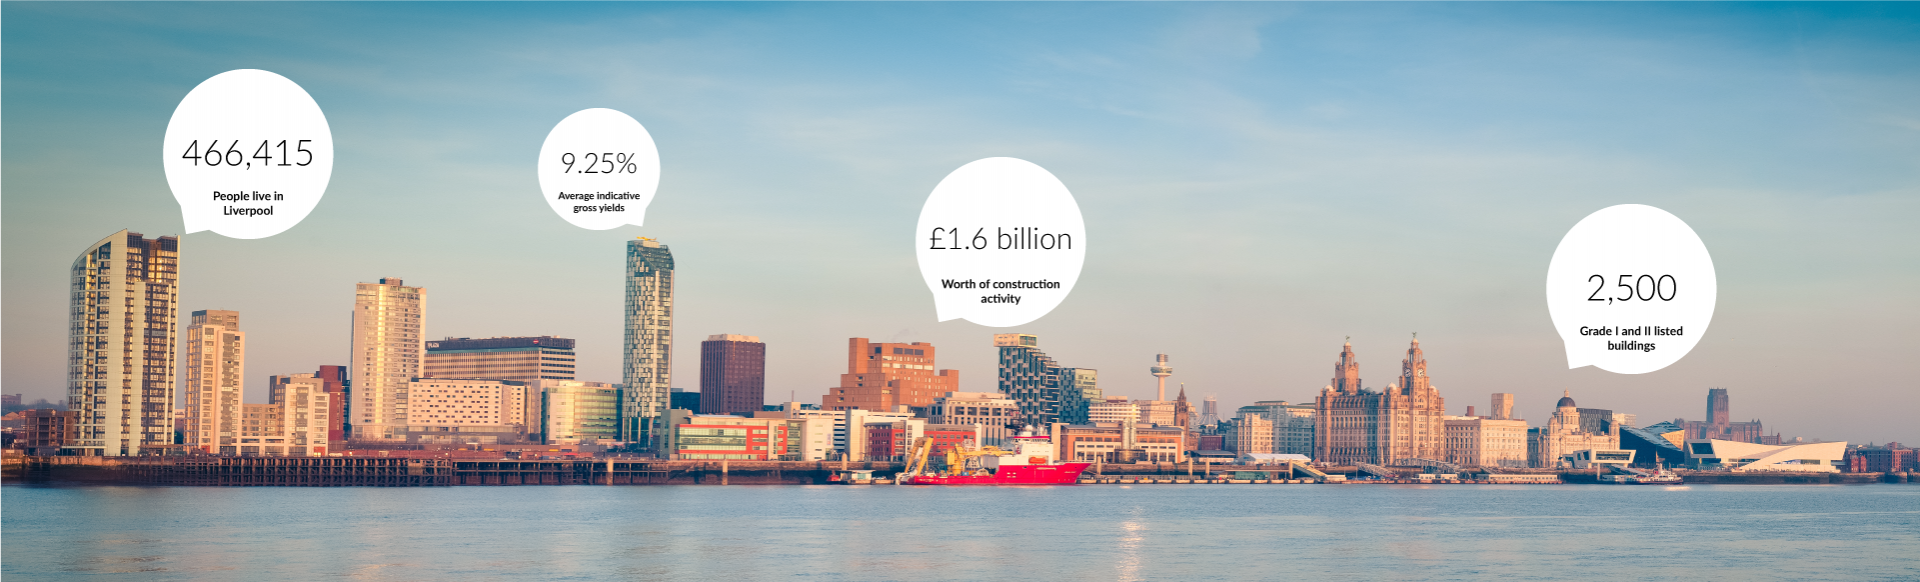 Why Invest In Liverpool?